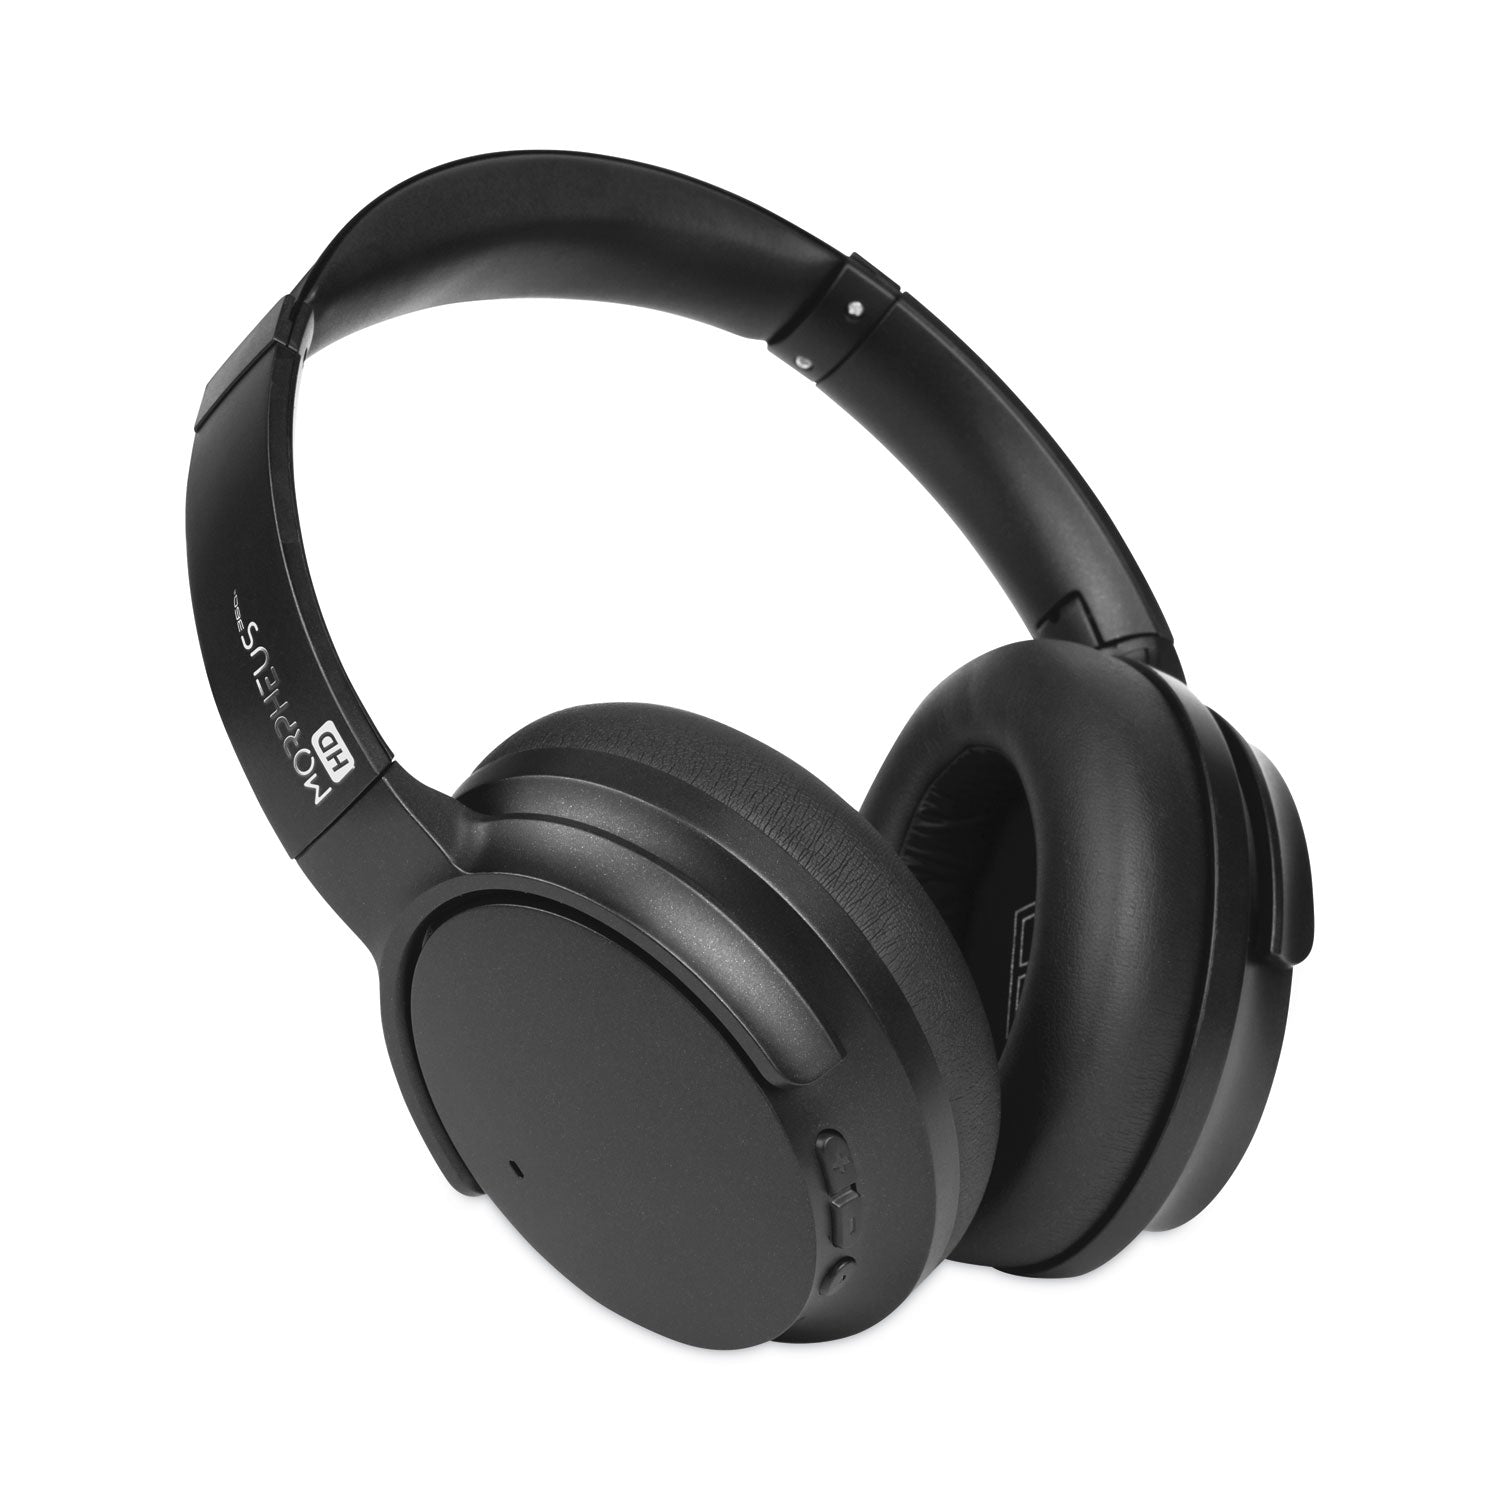 synergy-hd-wireless-noise-cancelling-headphones-bluetooth-headset-with-microphone-4-ft-cord-black_mhshp9550hd - 1